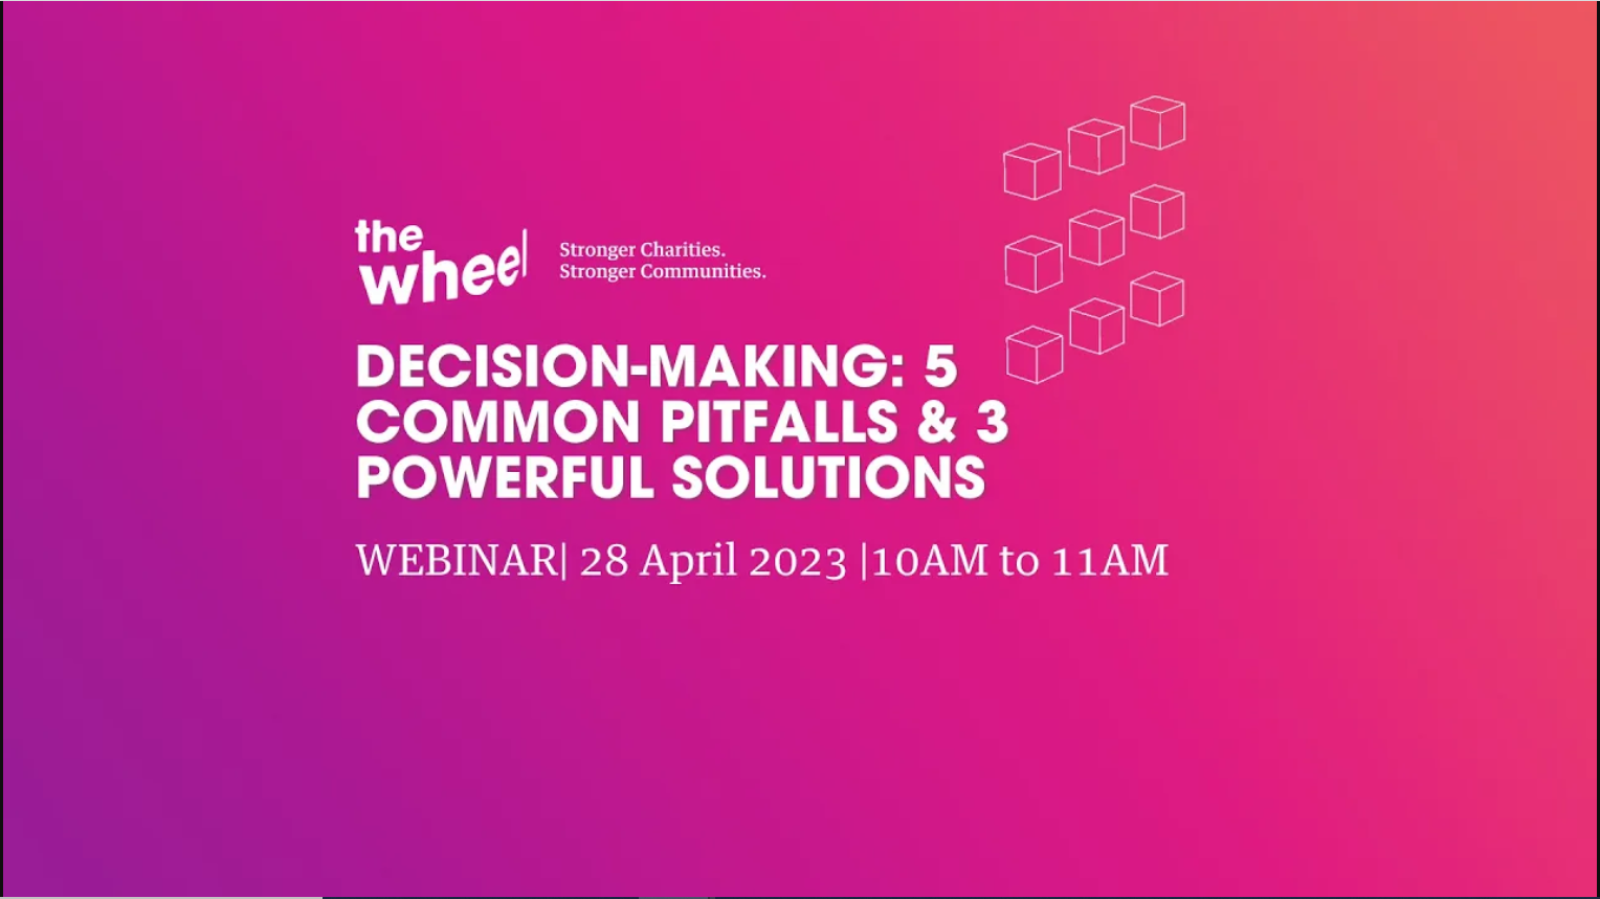 Decision-Making: 5 Common Pitfalls & 3 Powerful Solutions 28 April 2023